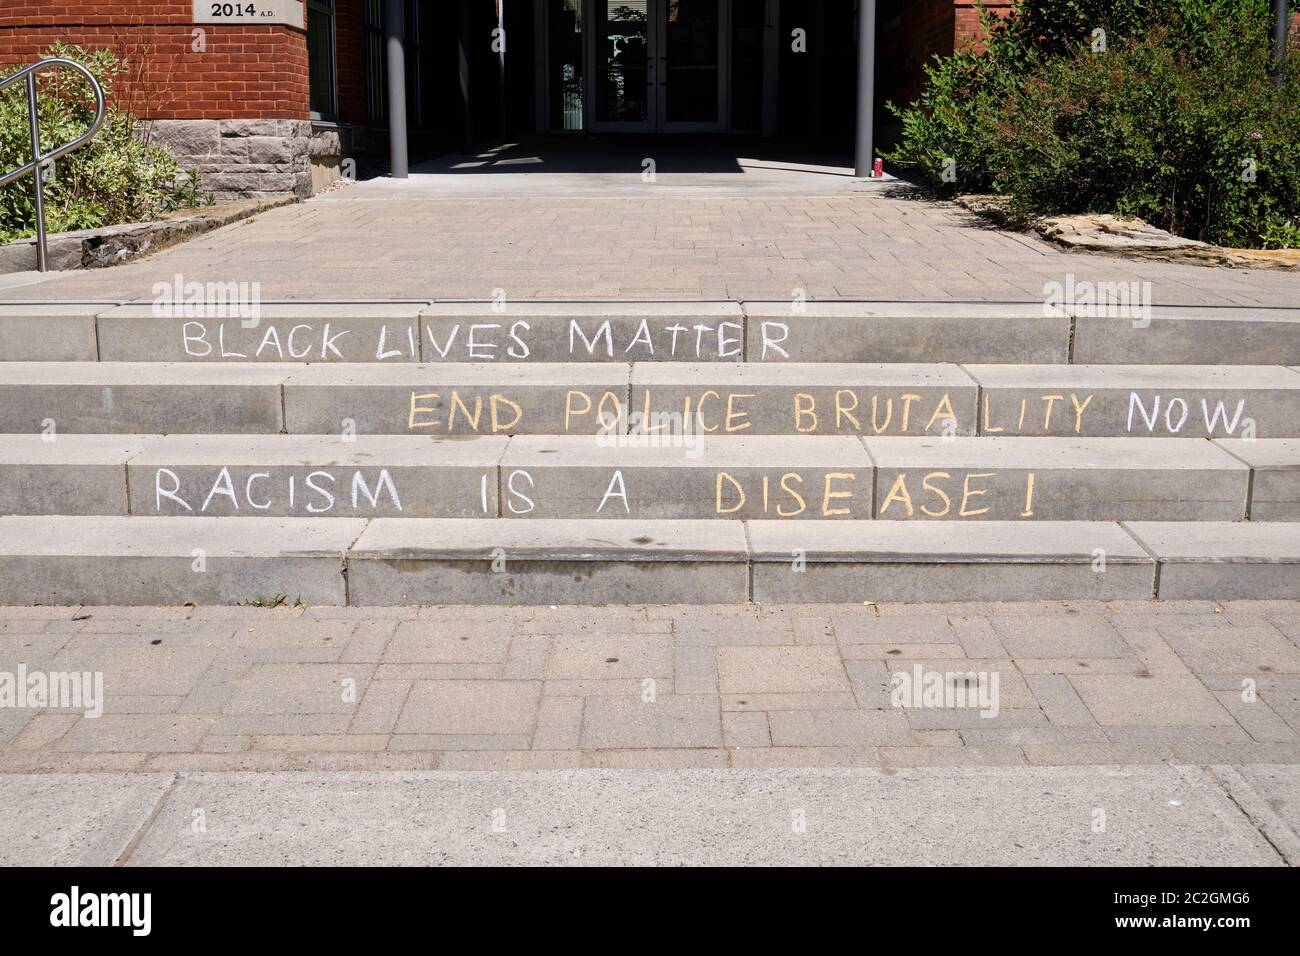 Black Lives Matter message with End Police Brutality and Racism is Disease written in Chalk on school steps  in The Glebe-Ottawa, Canada Stock Photo